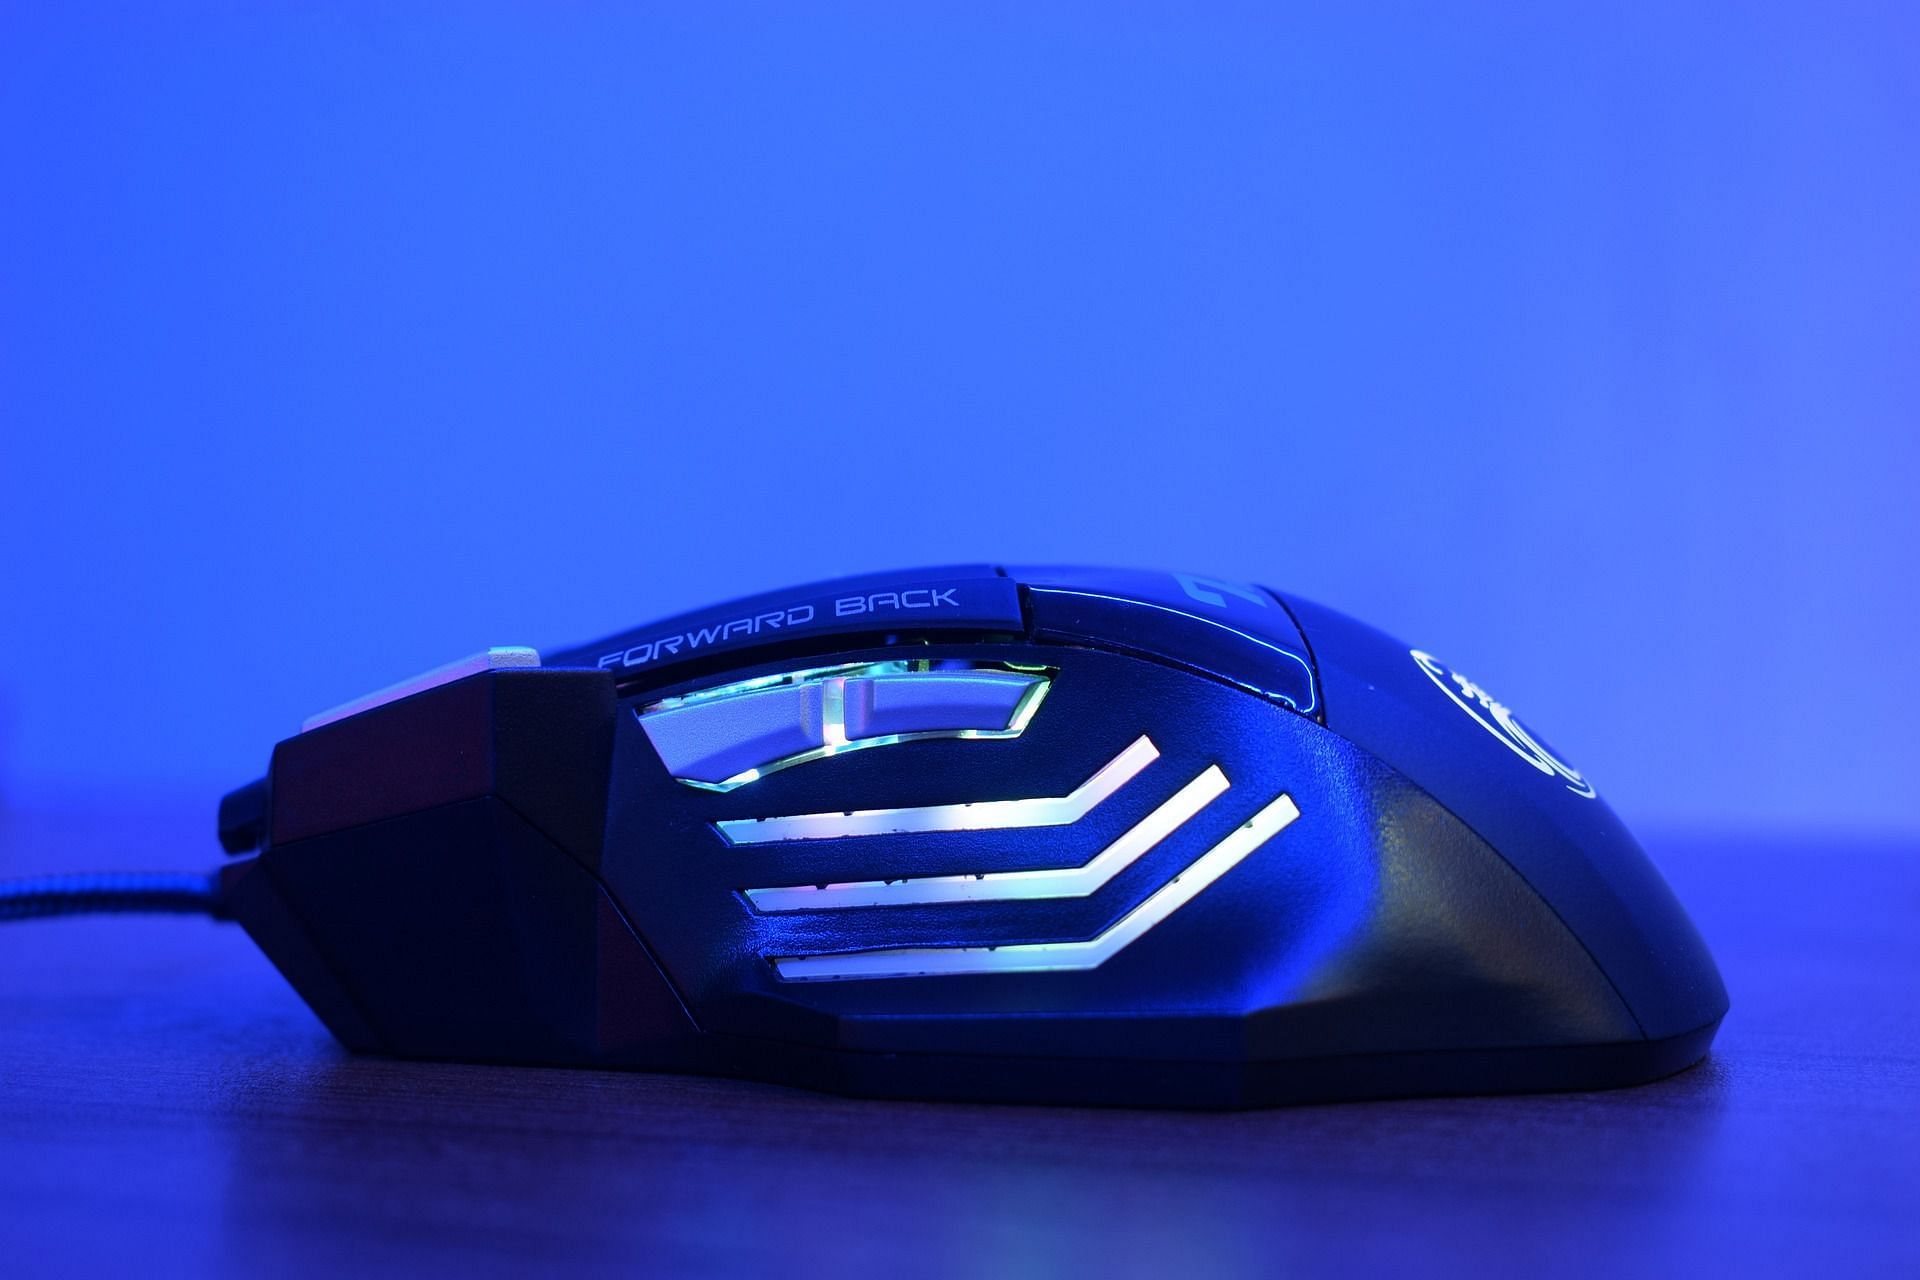 Mouse, one of the must-own gaming accessories for 2023 (Image via Pixabay)